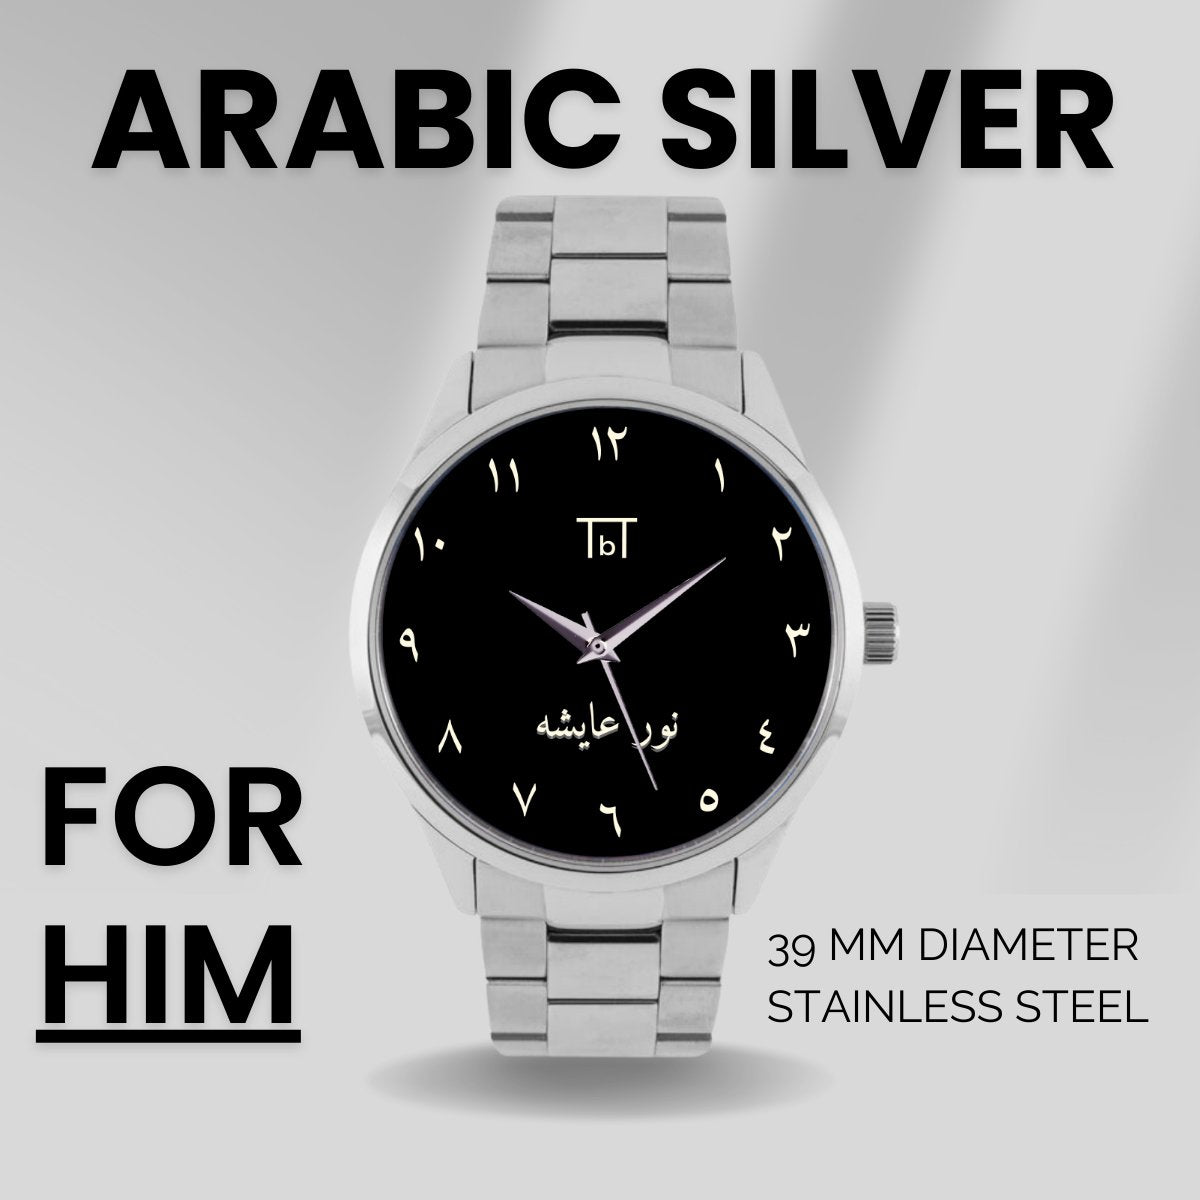 Arabic Dial Watch in Silver Stainless Steel FOR HIM - TbT WatchesTbT Watches